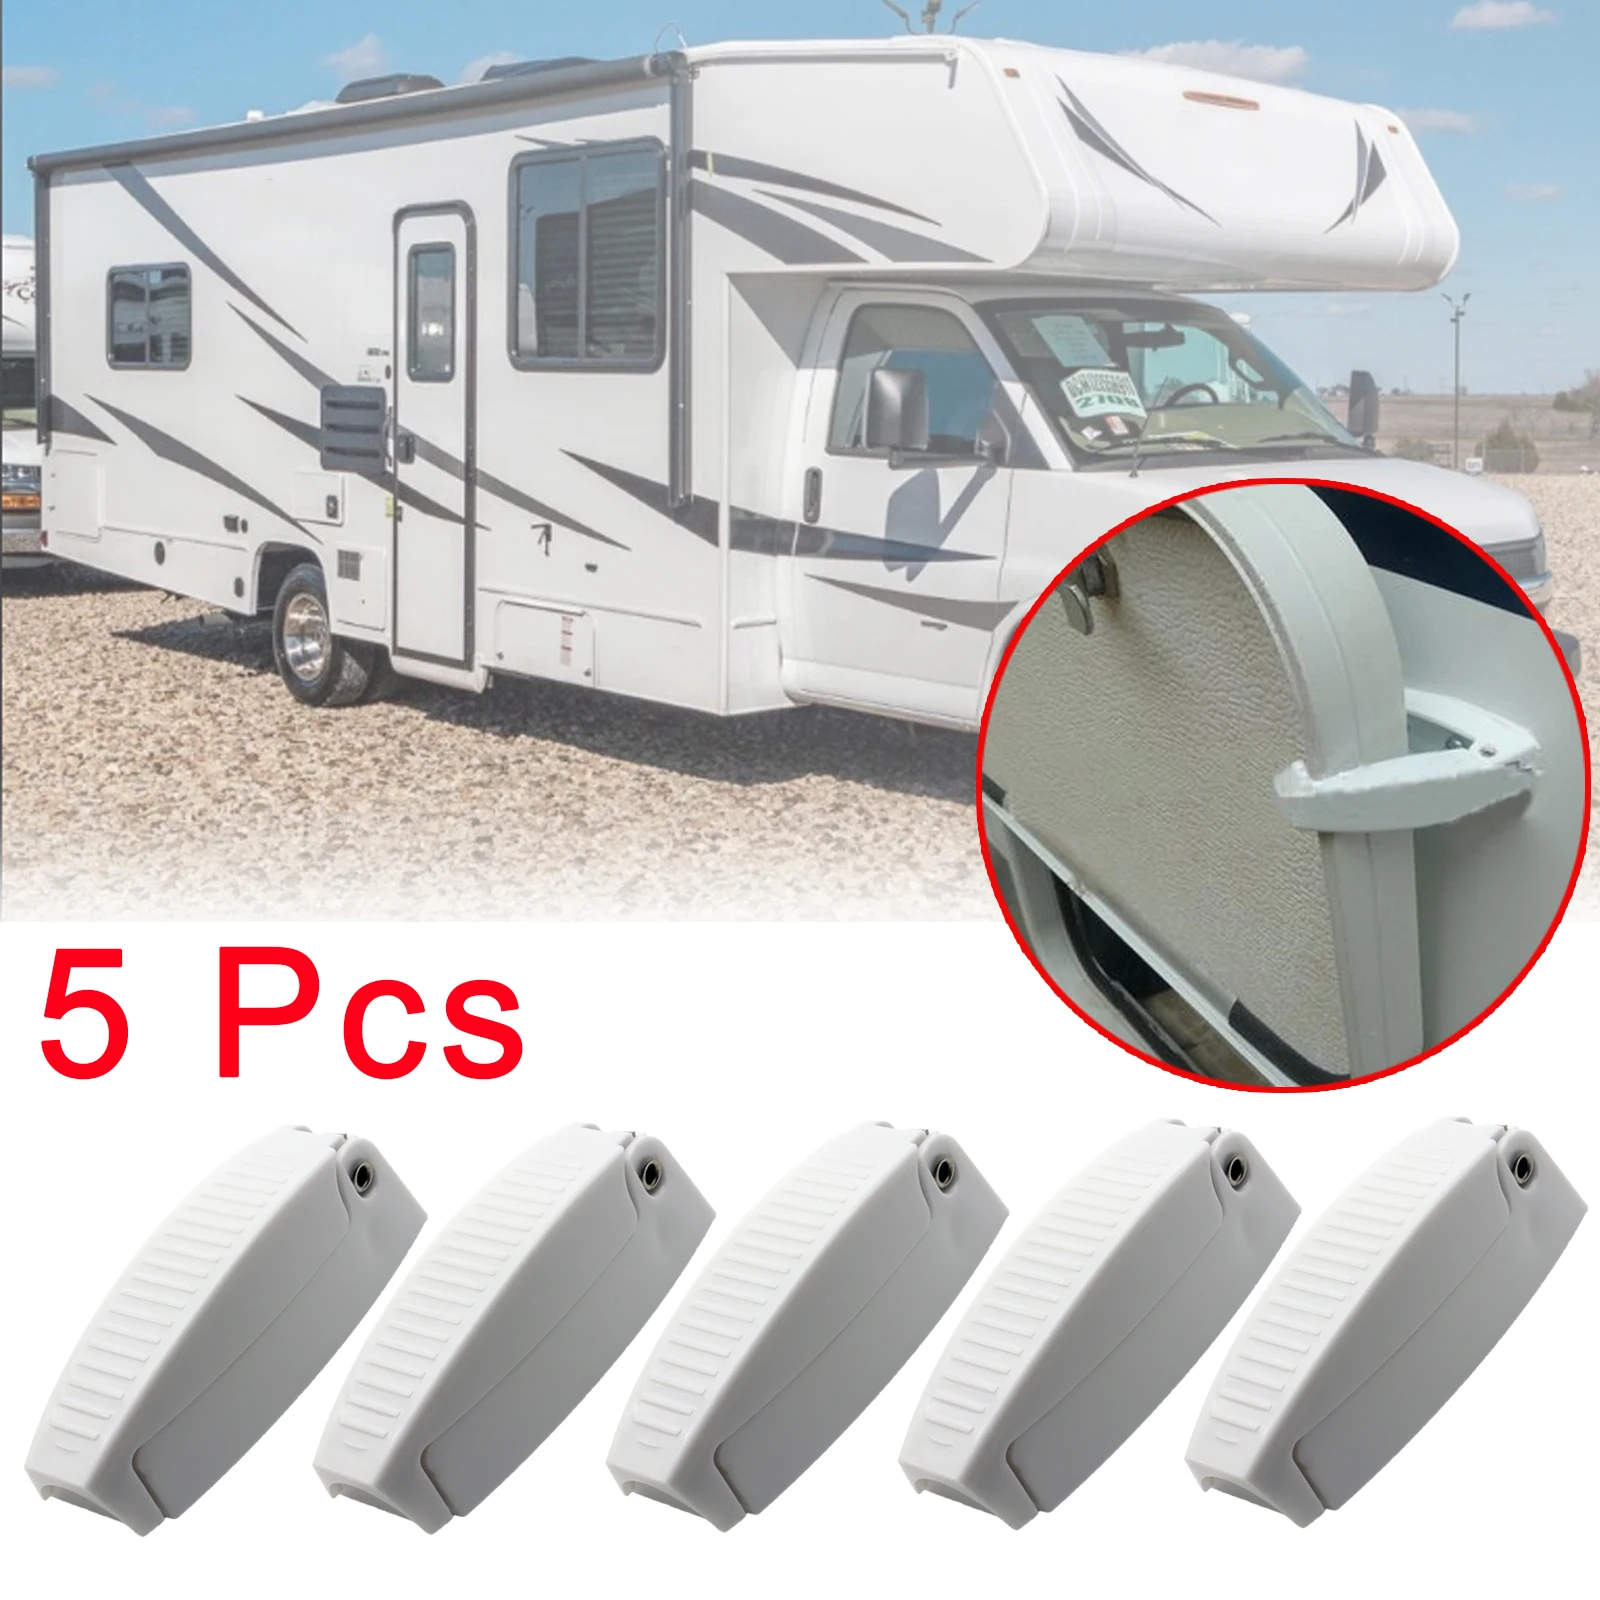 

5x RV White Rounded Baggage Plastic Door Catch Compartment Latch Holders Clips For Camper Trailer Motorhome Car Accessories